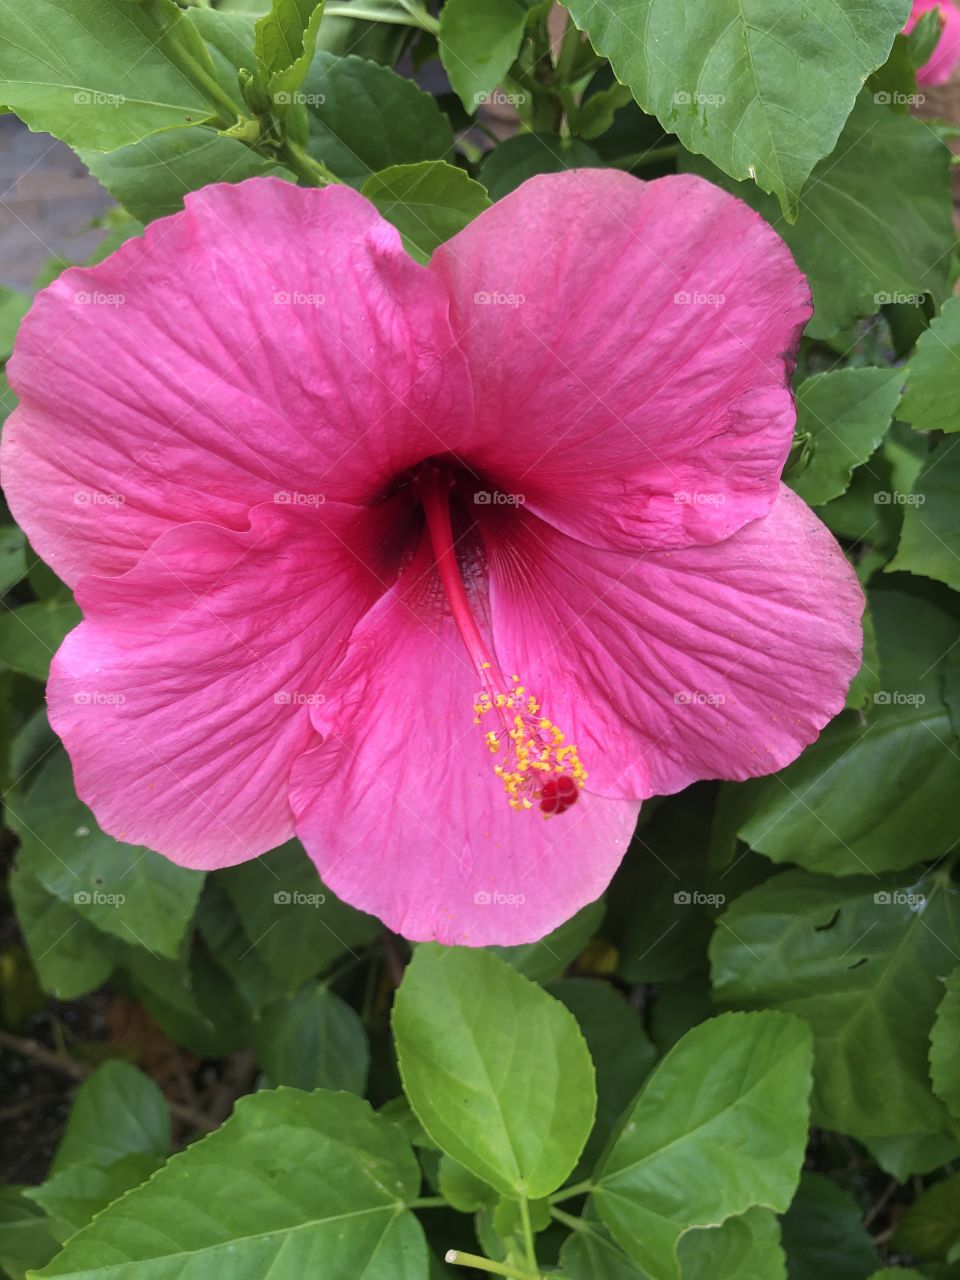 A beautiful pink hibiscus in full bloom.